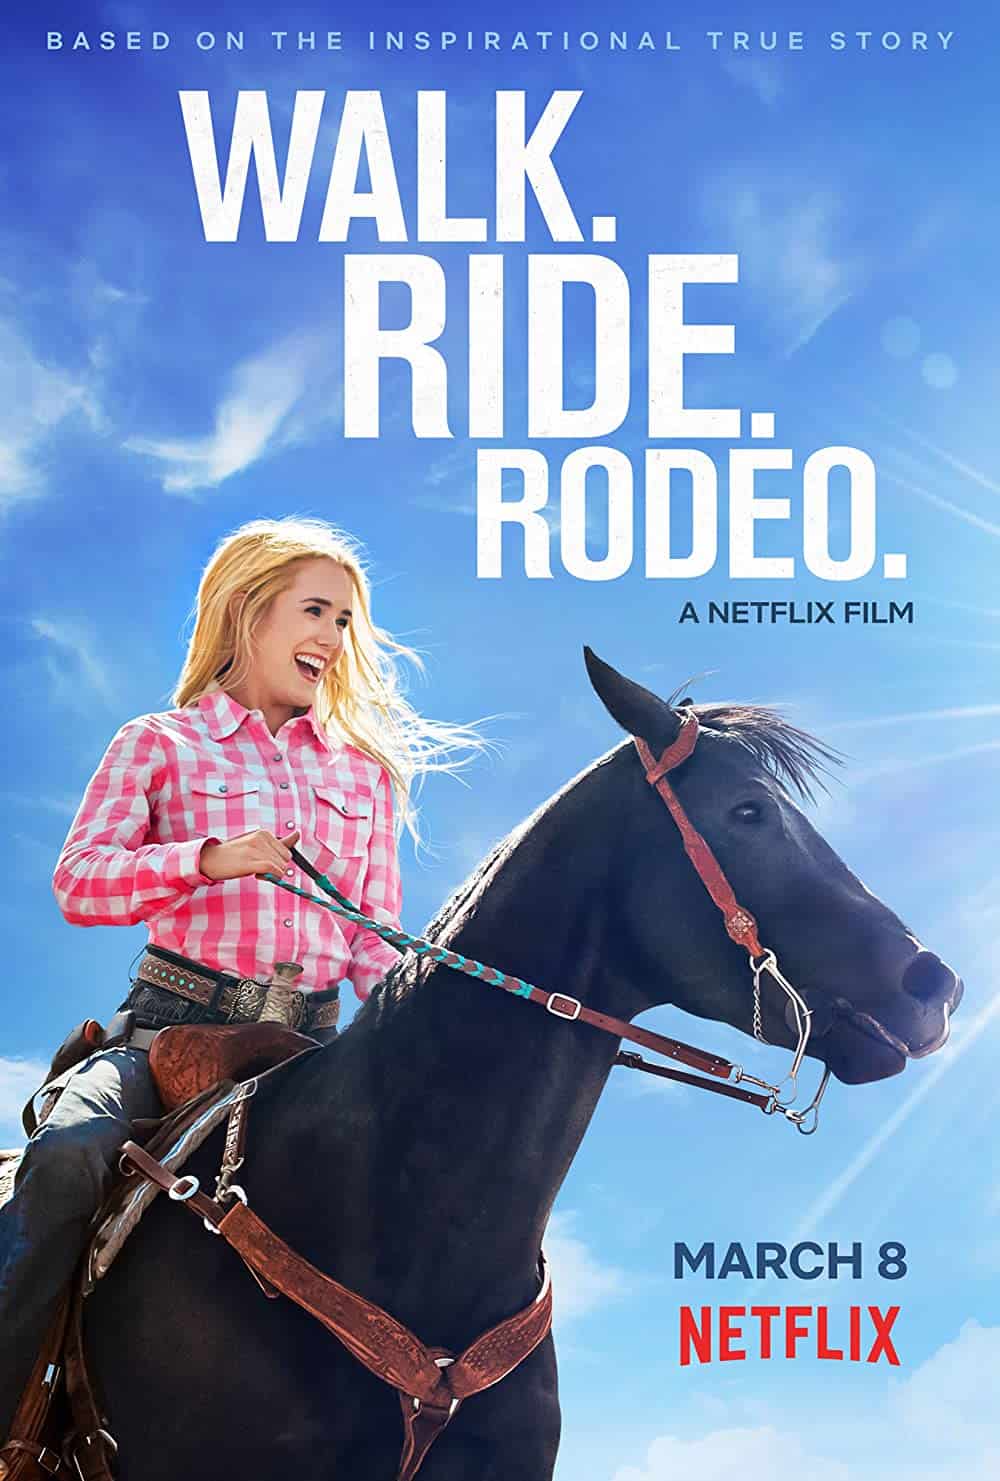 25 Best Horse Movies You Should Totally Watch – Walk. Ride. Rodeo